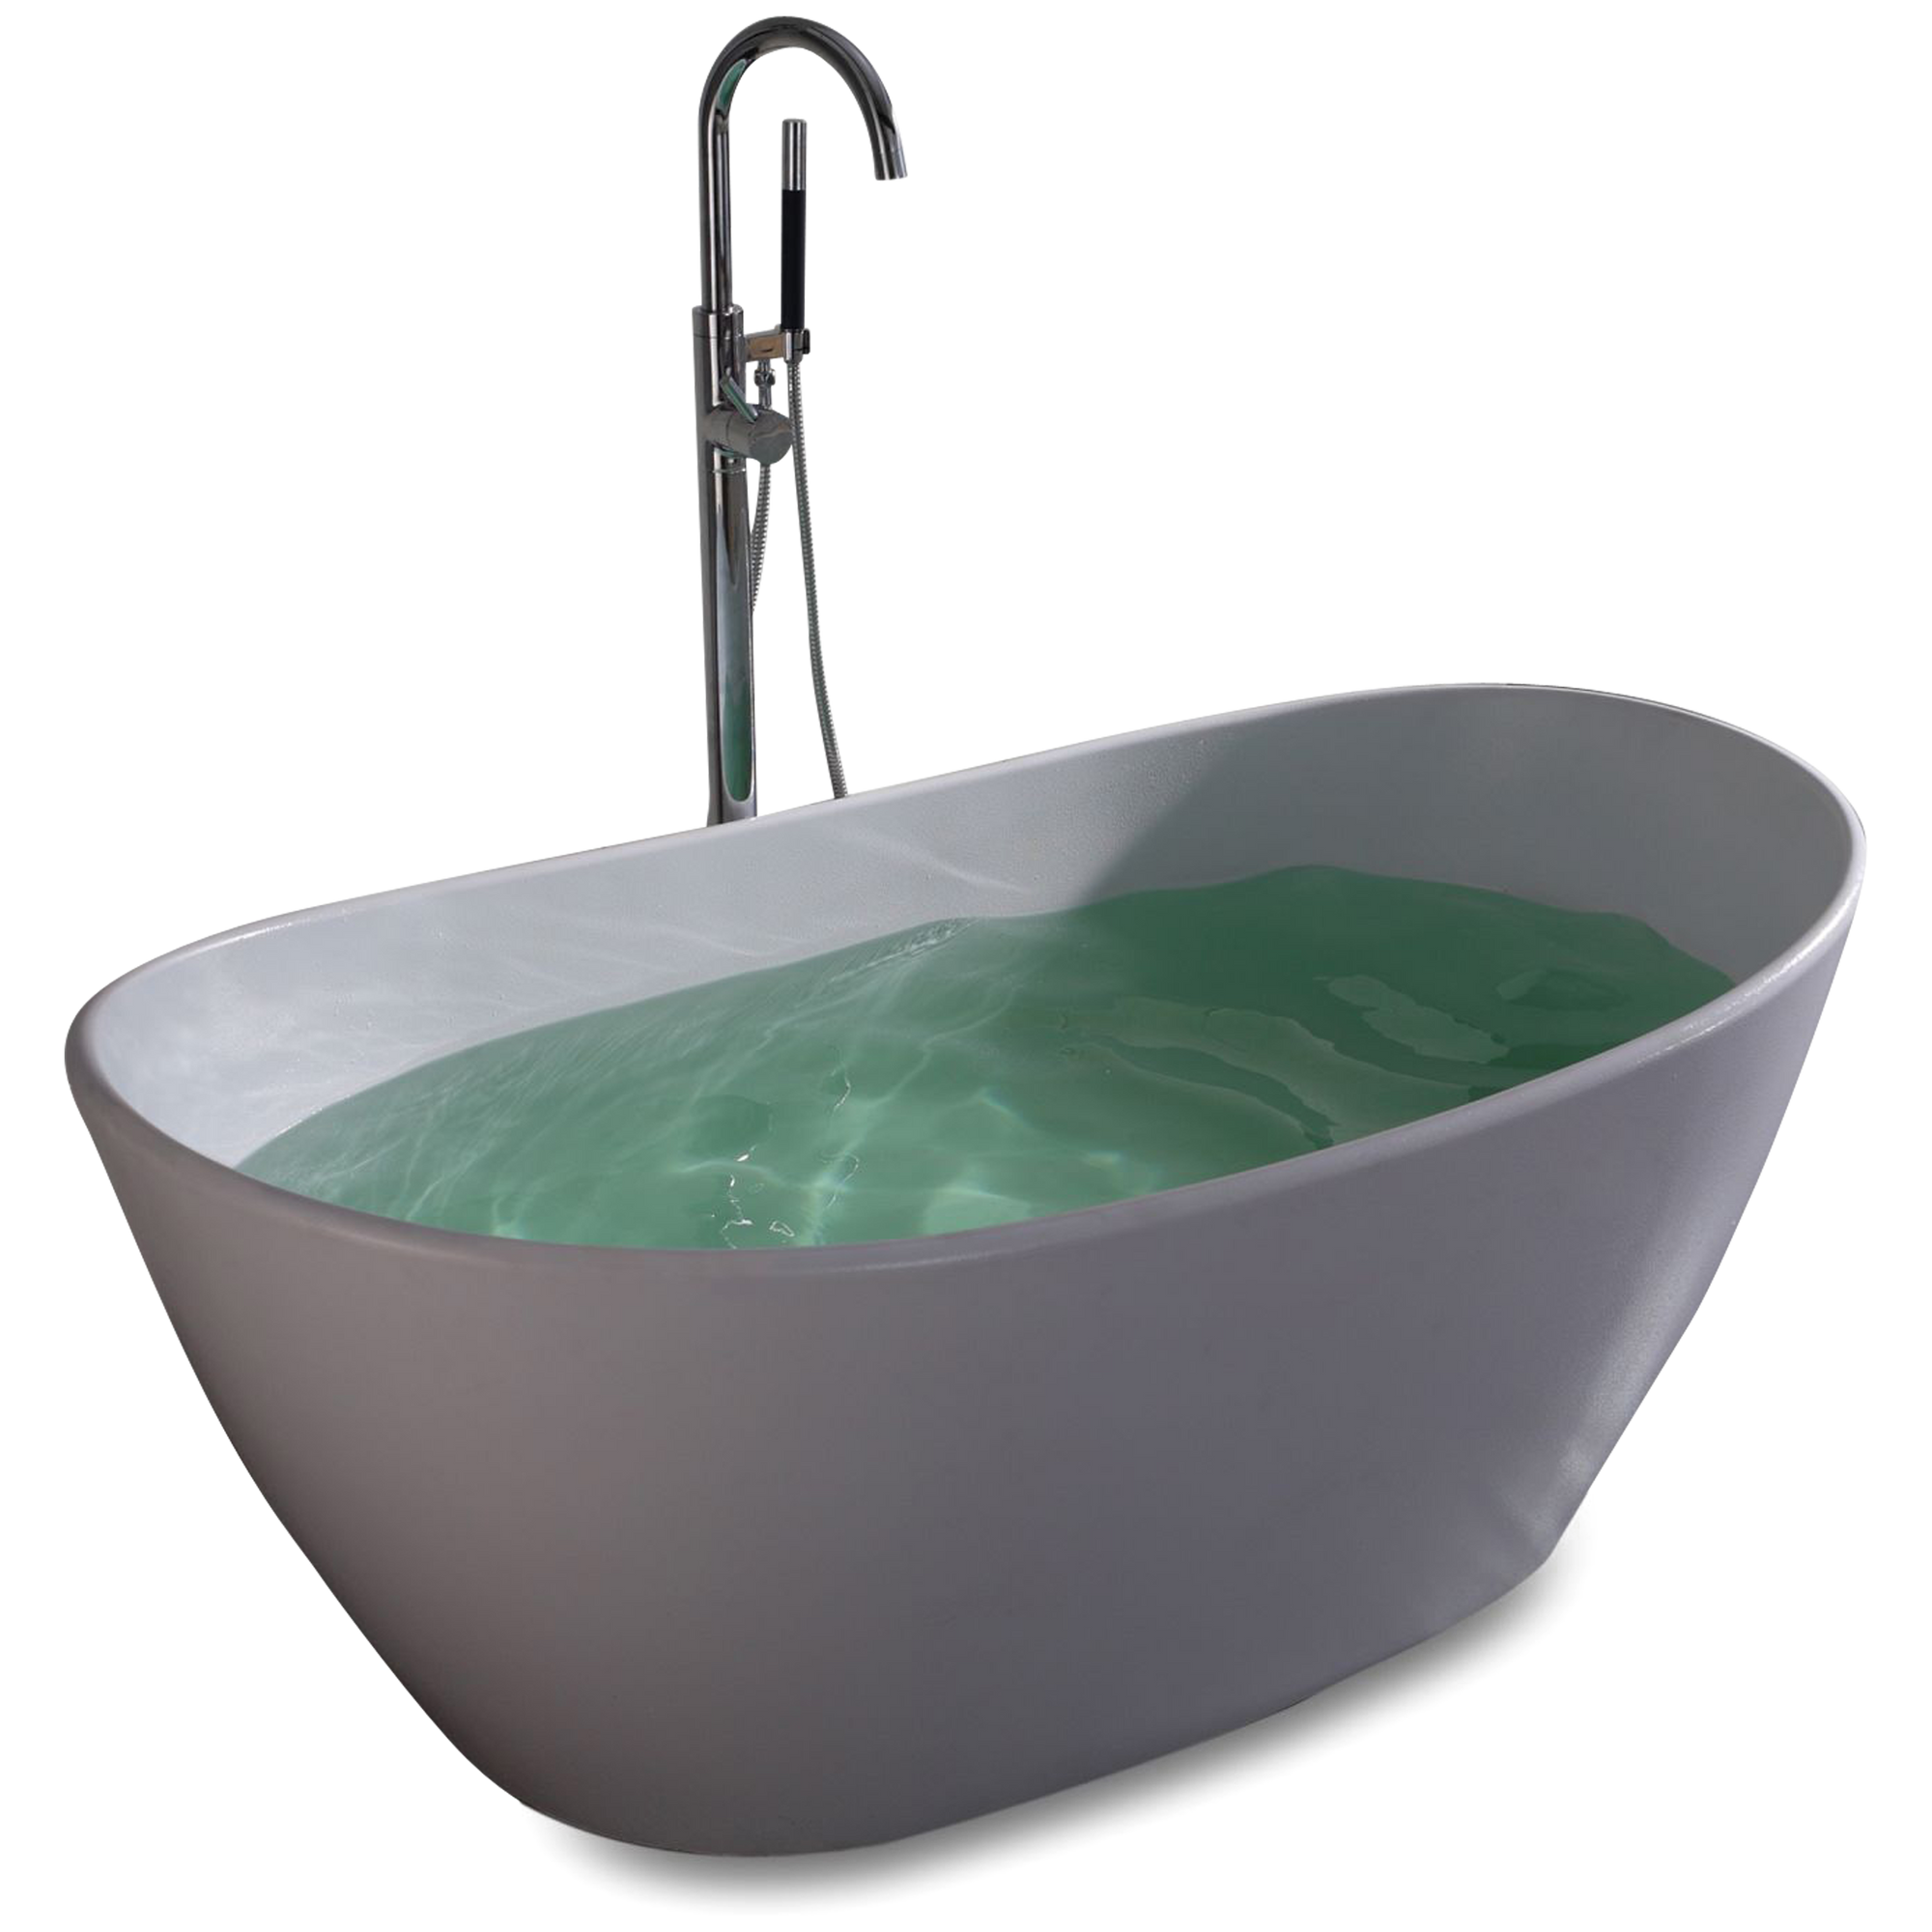 The Farrah soaker bath was designed with classical symmetry in mind with a nod to transitional style.